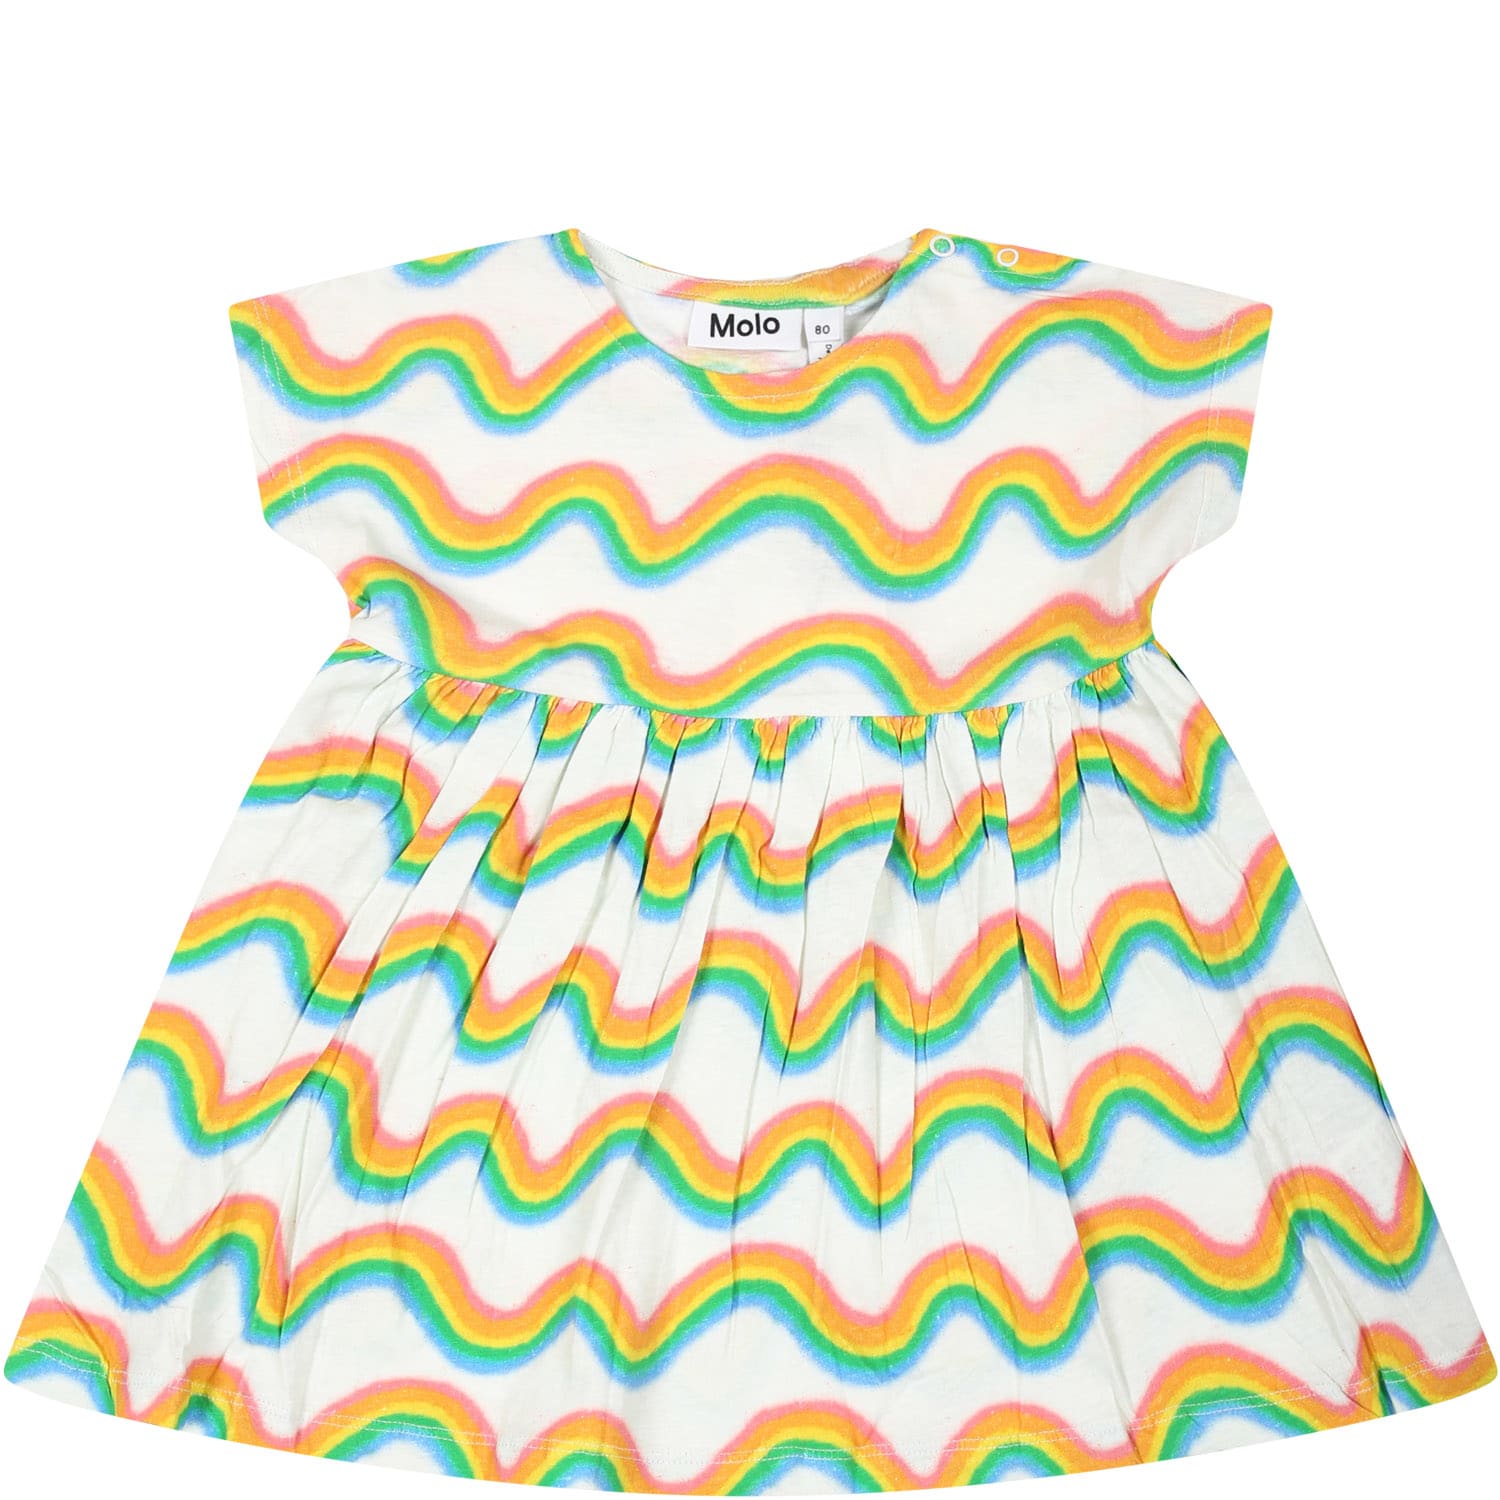 Molo White Dress For Baby Girl With Rainbow Print In Multicolor